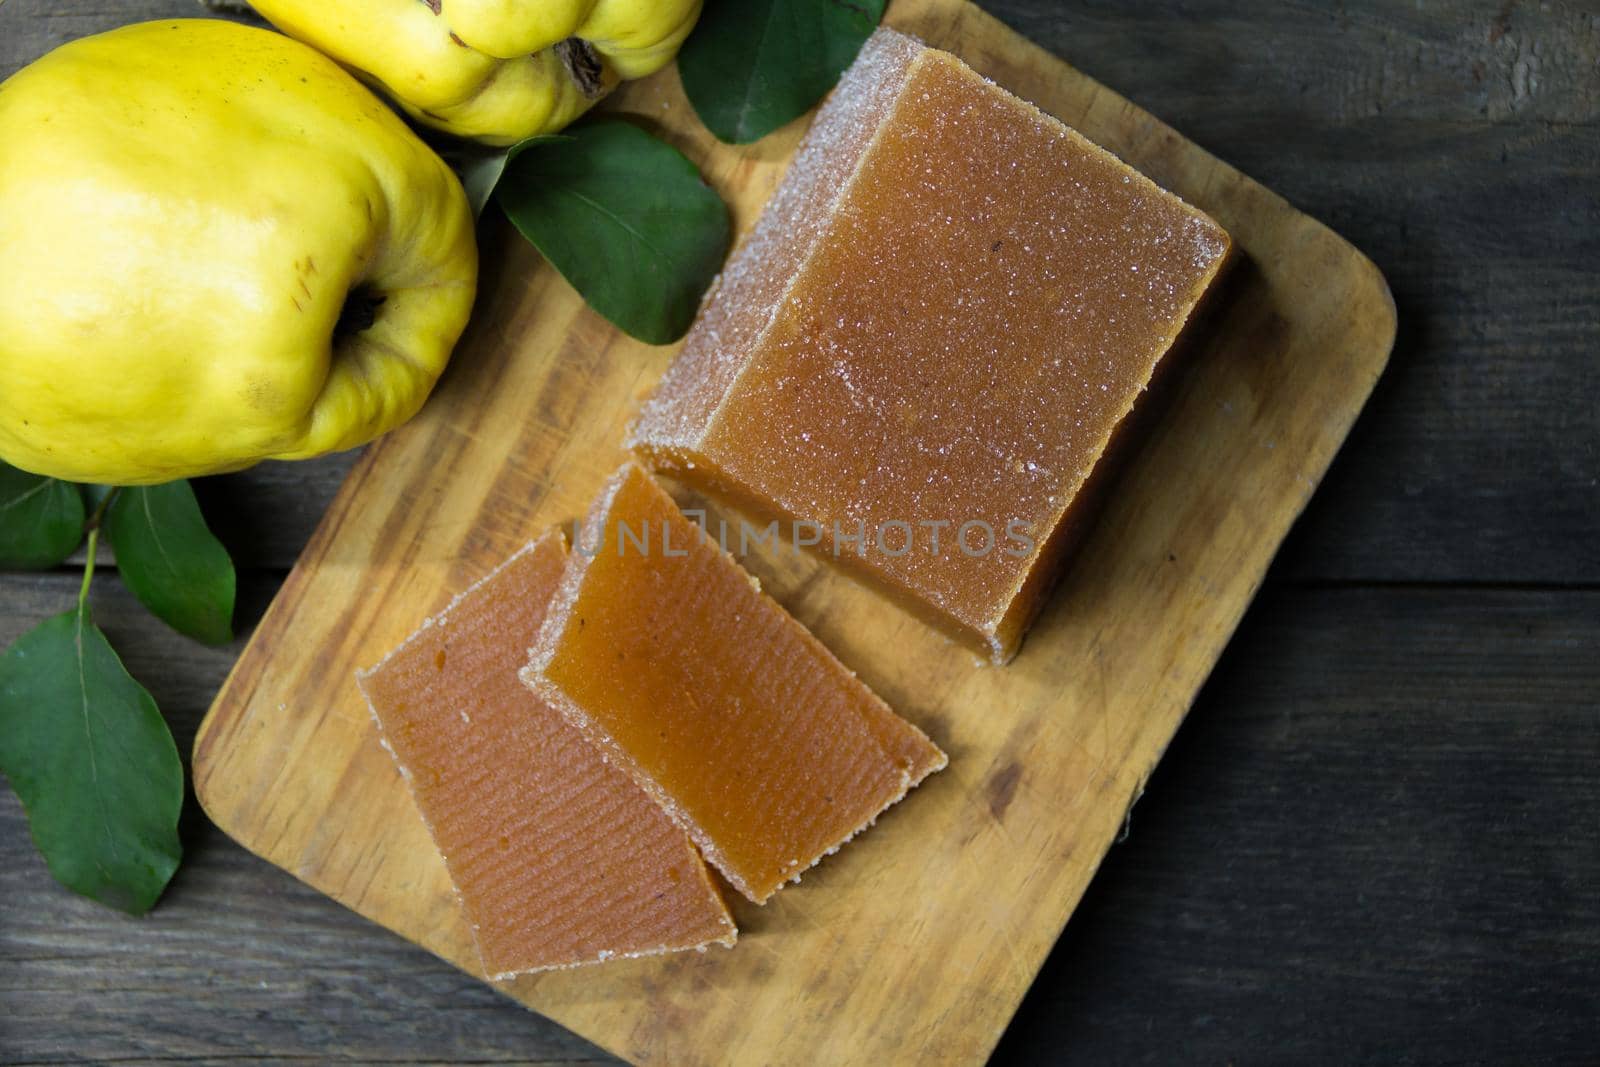 quince jelly and quinces on rustic wooden background